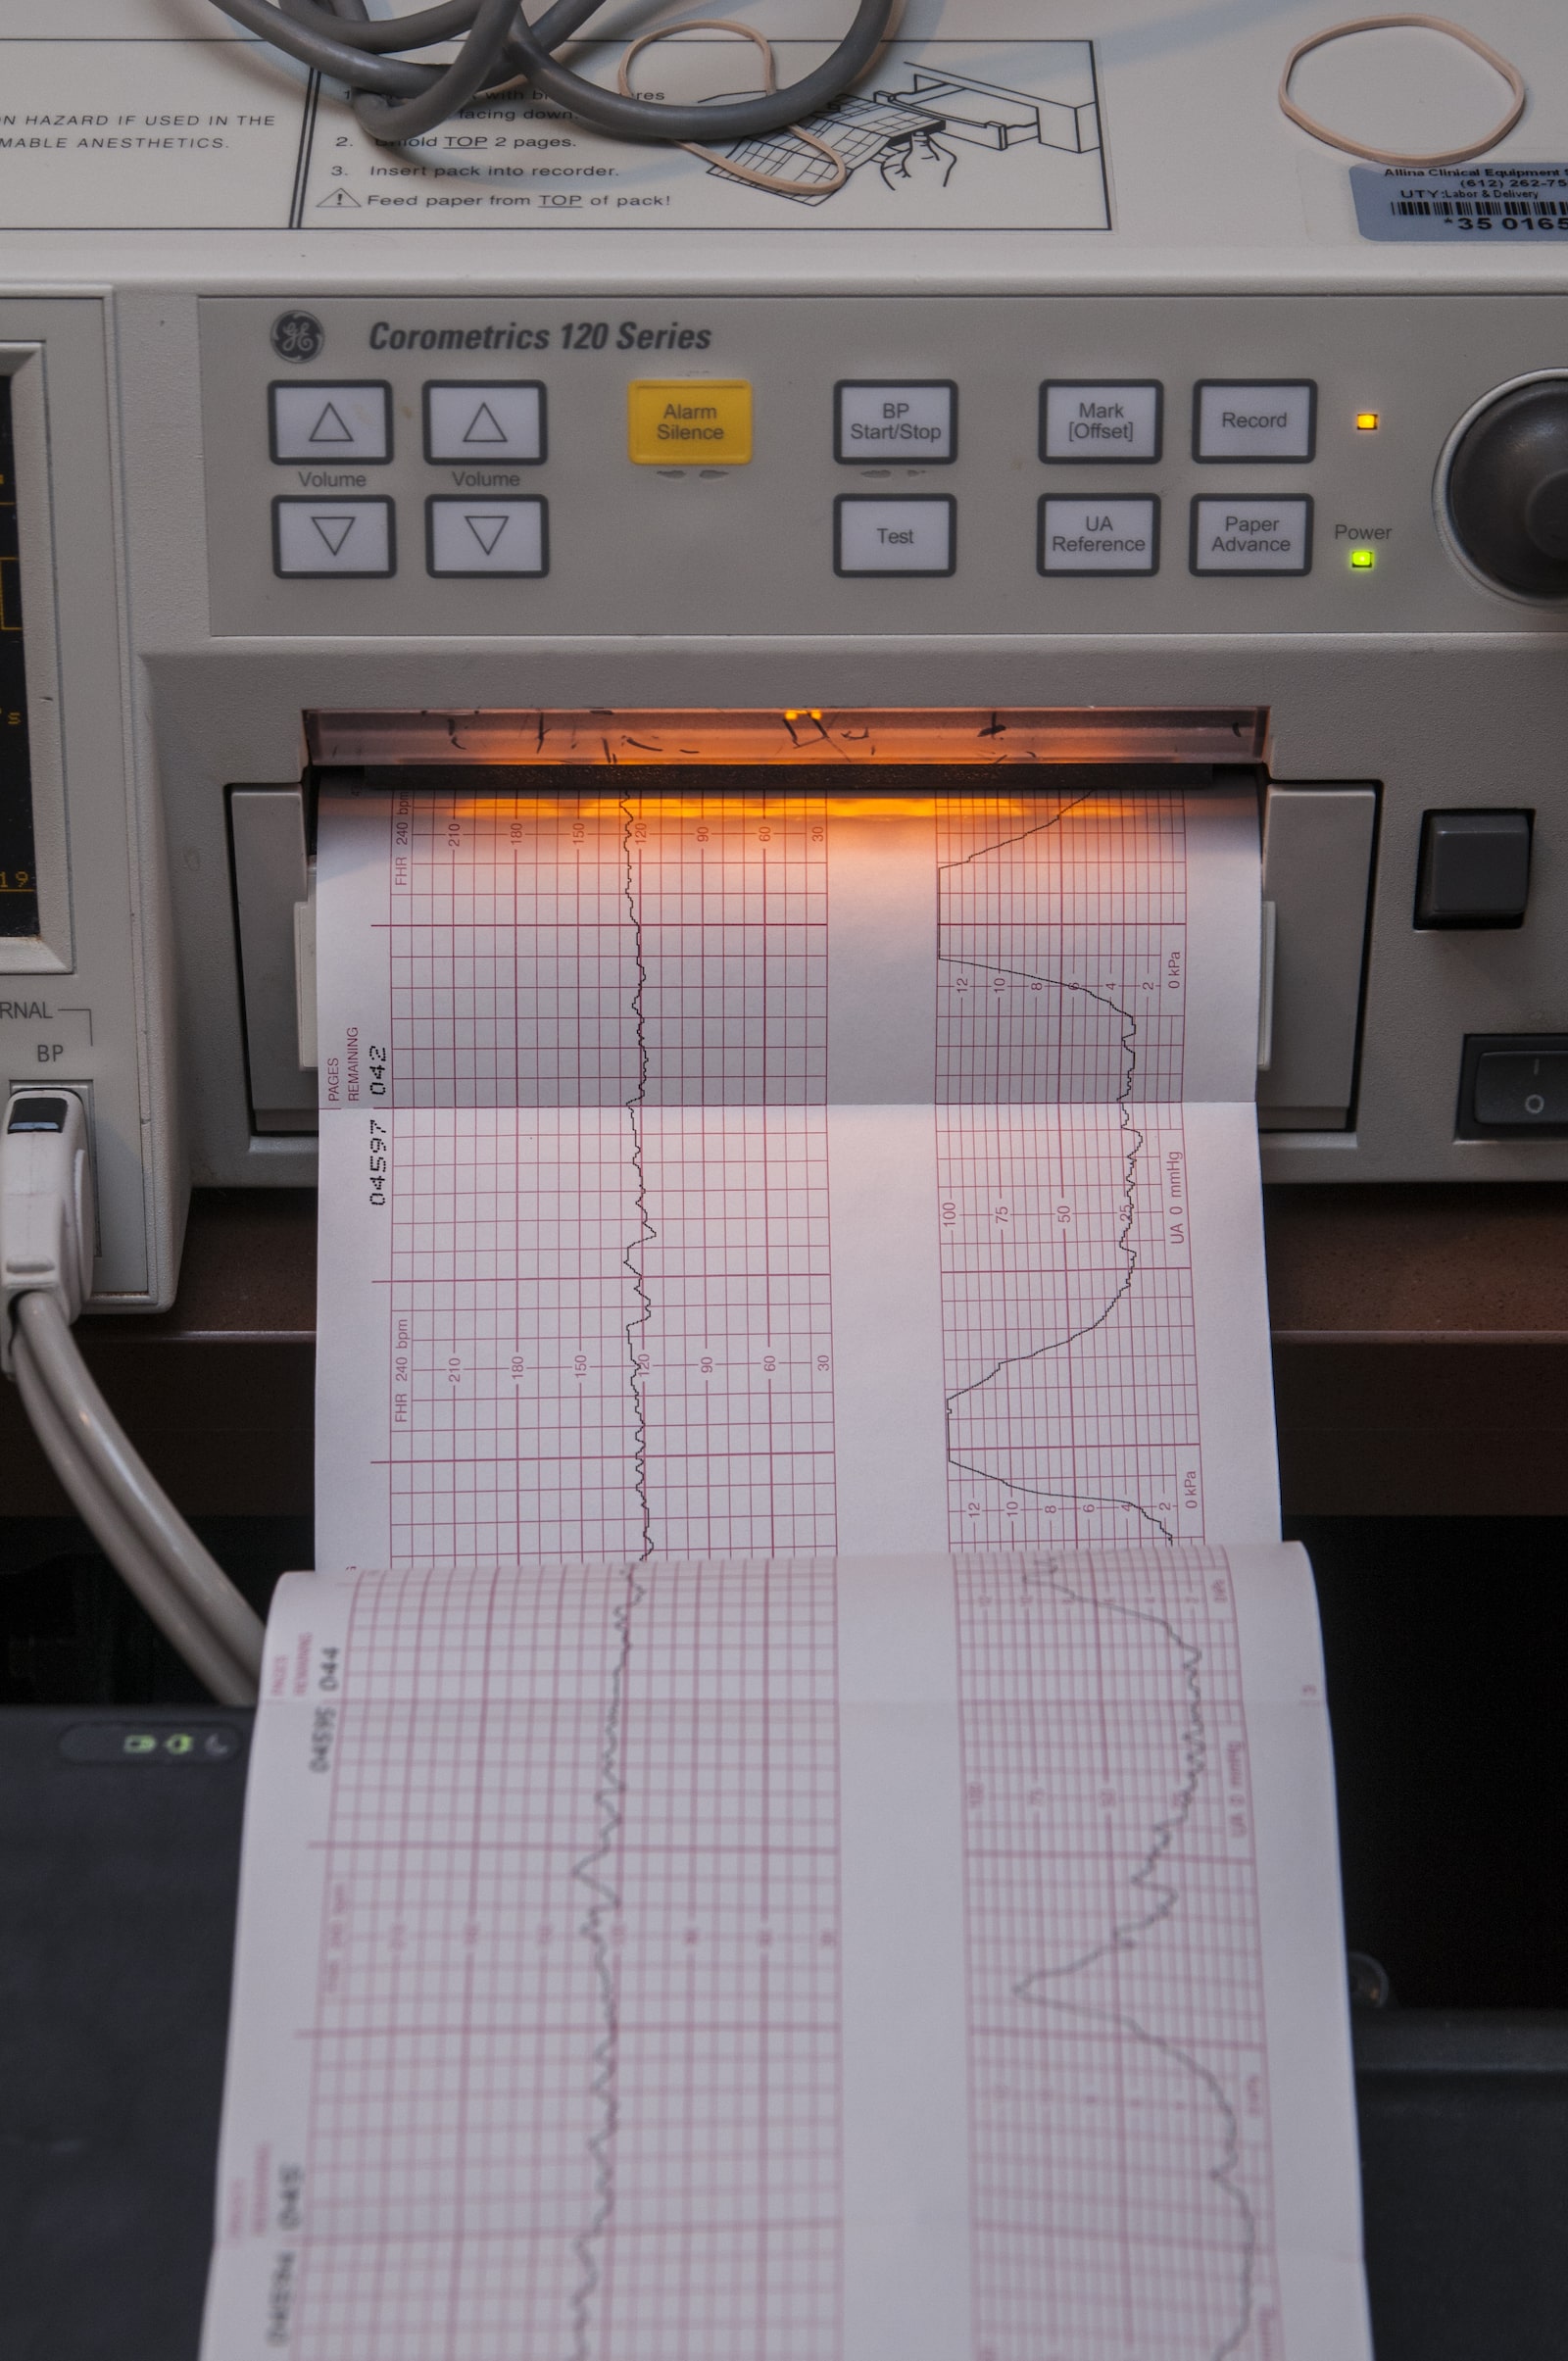 A machine with a long printout showing lines and graphs